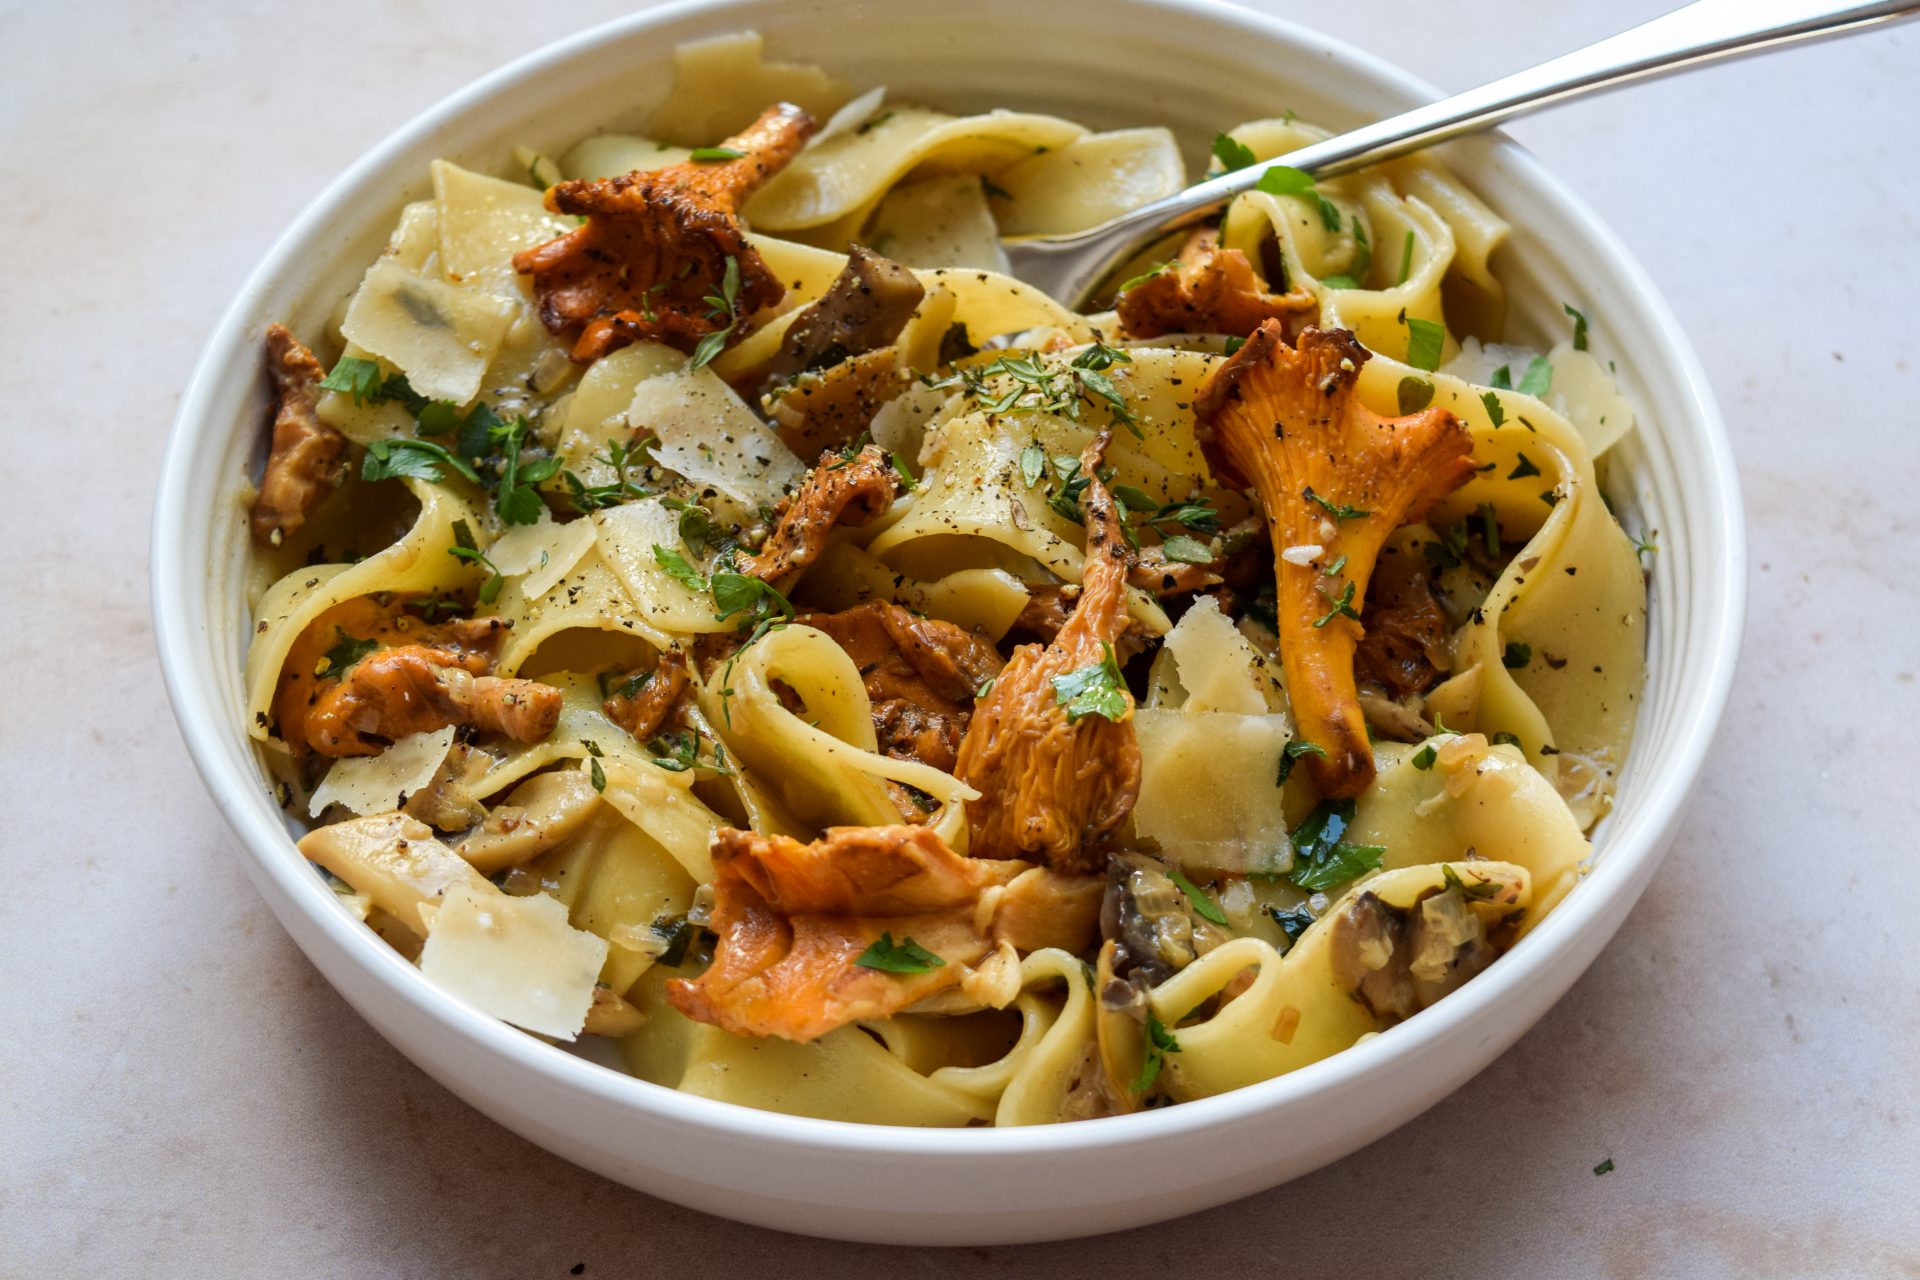 Our Guide to Making Pappardelle Pasta